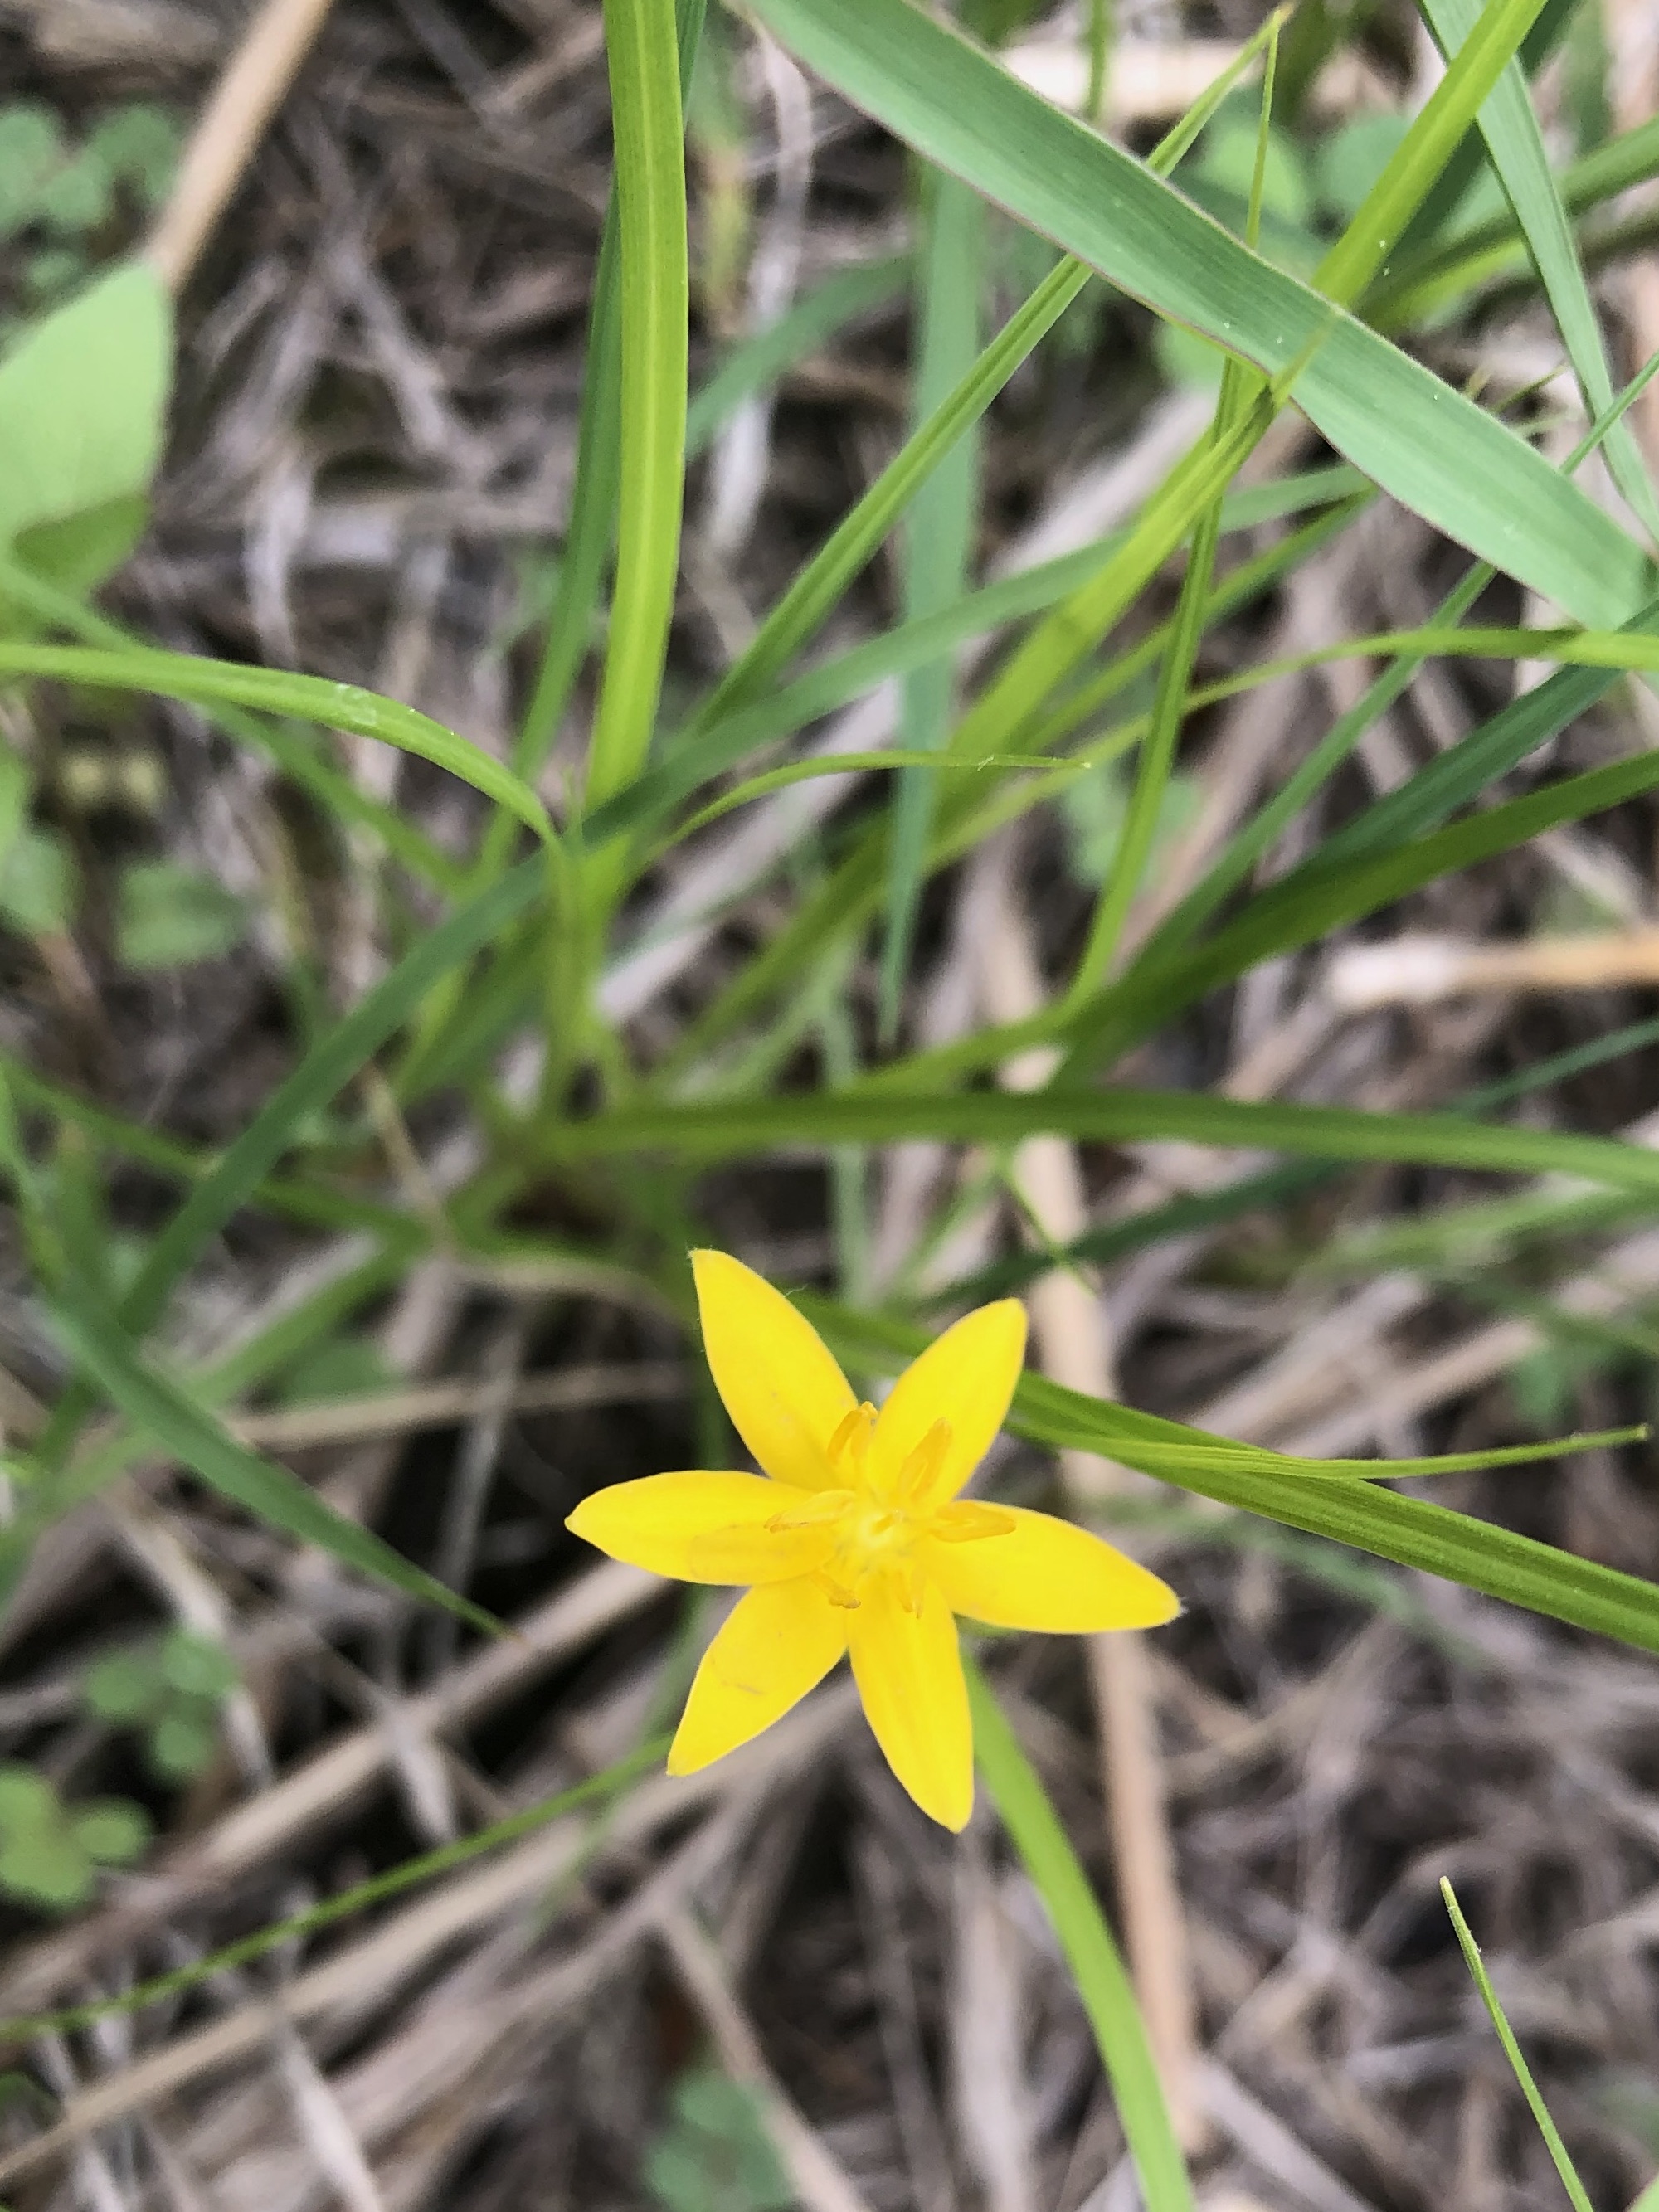 Yellow Star Grass in the Curtis Prairie in the University of Wisconsin-Madison Arboretum in Madison, Wisconsin on May 21, 2022.